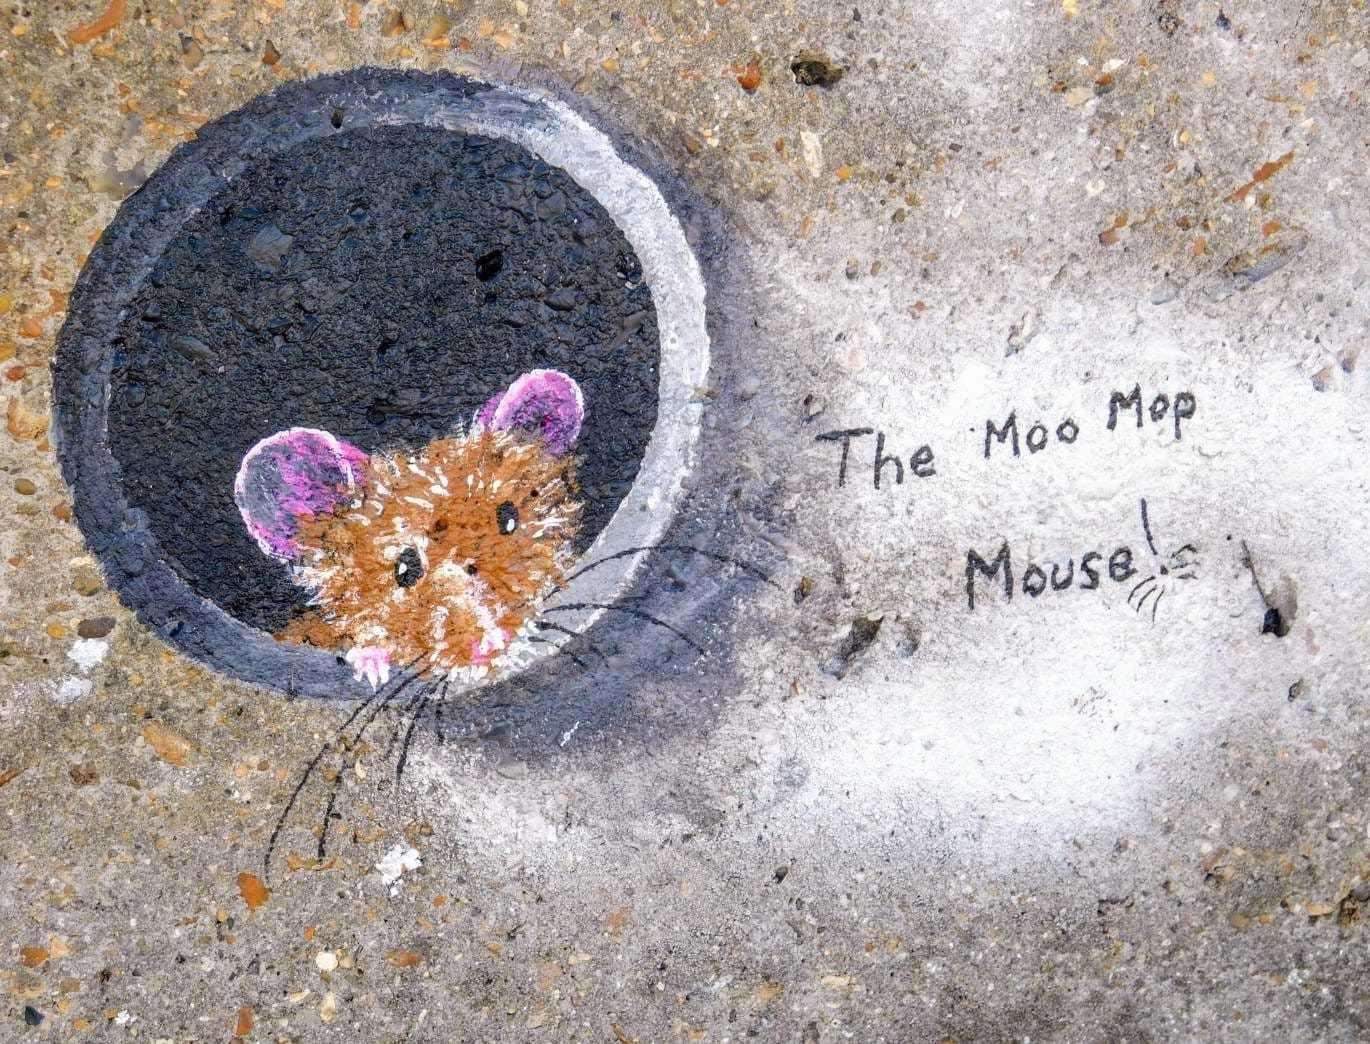 Sheppey's Moo Mop Mouse poking her head out of a drain on Sheerness seafront. Picture: Yvonne Youd